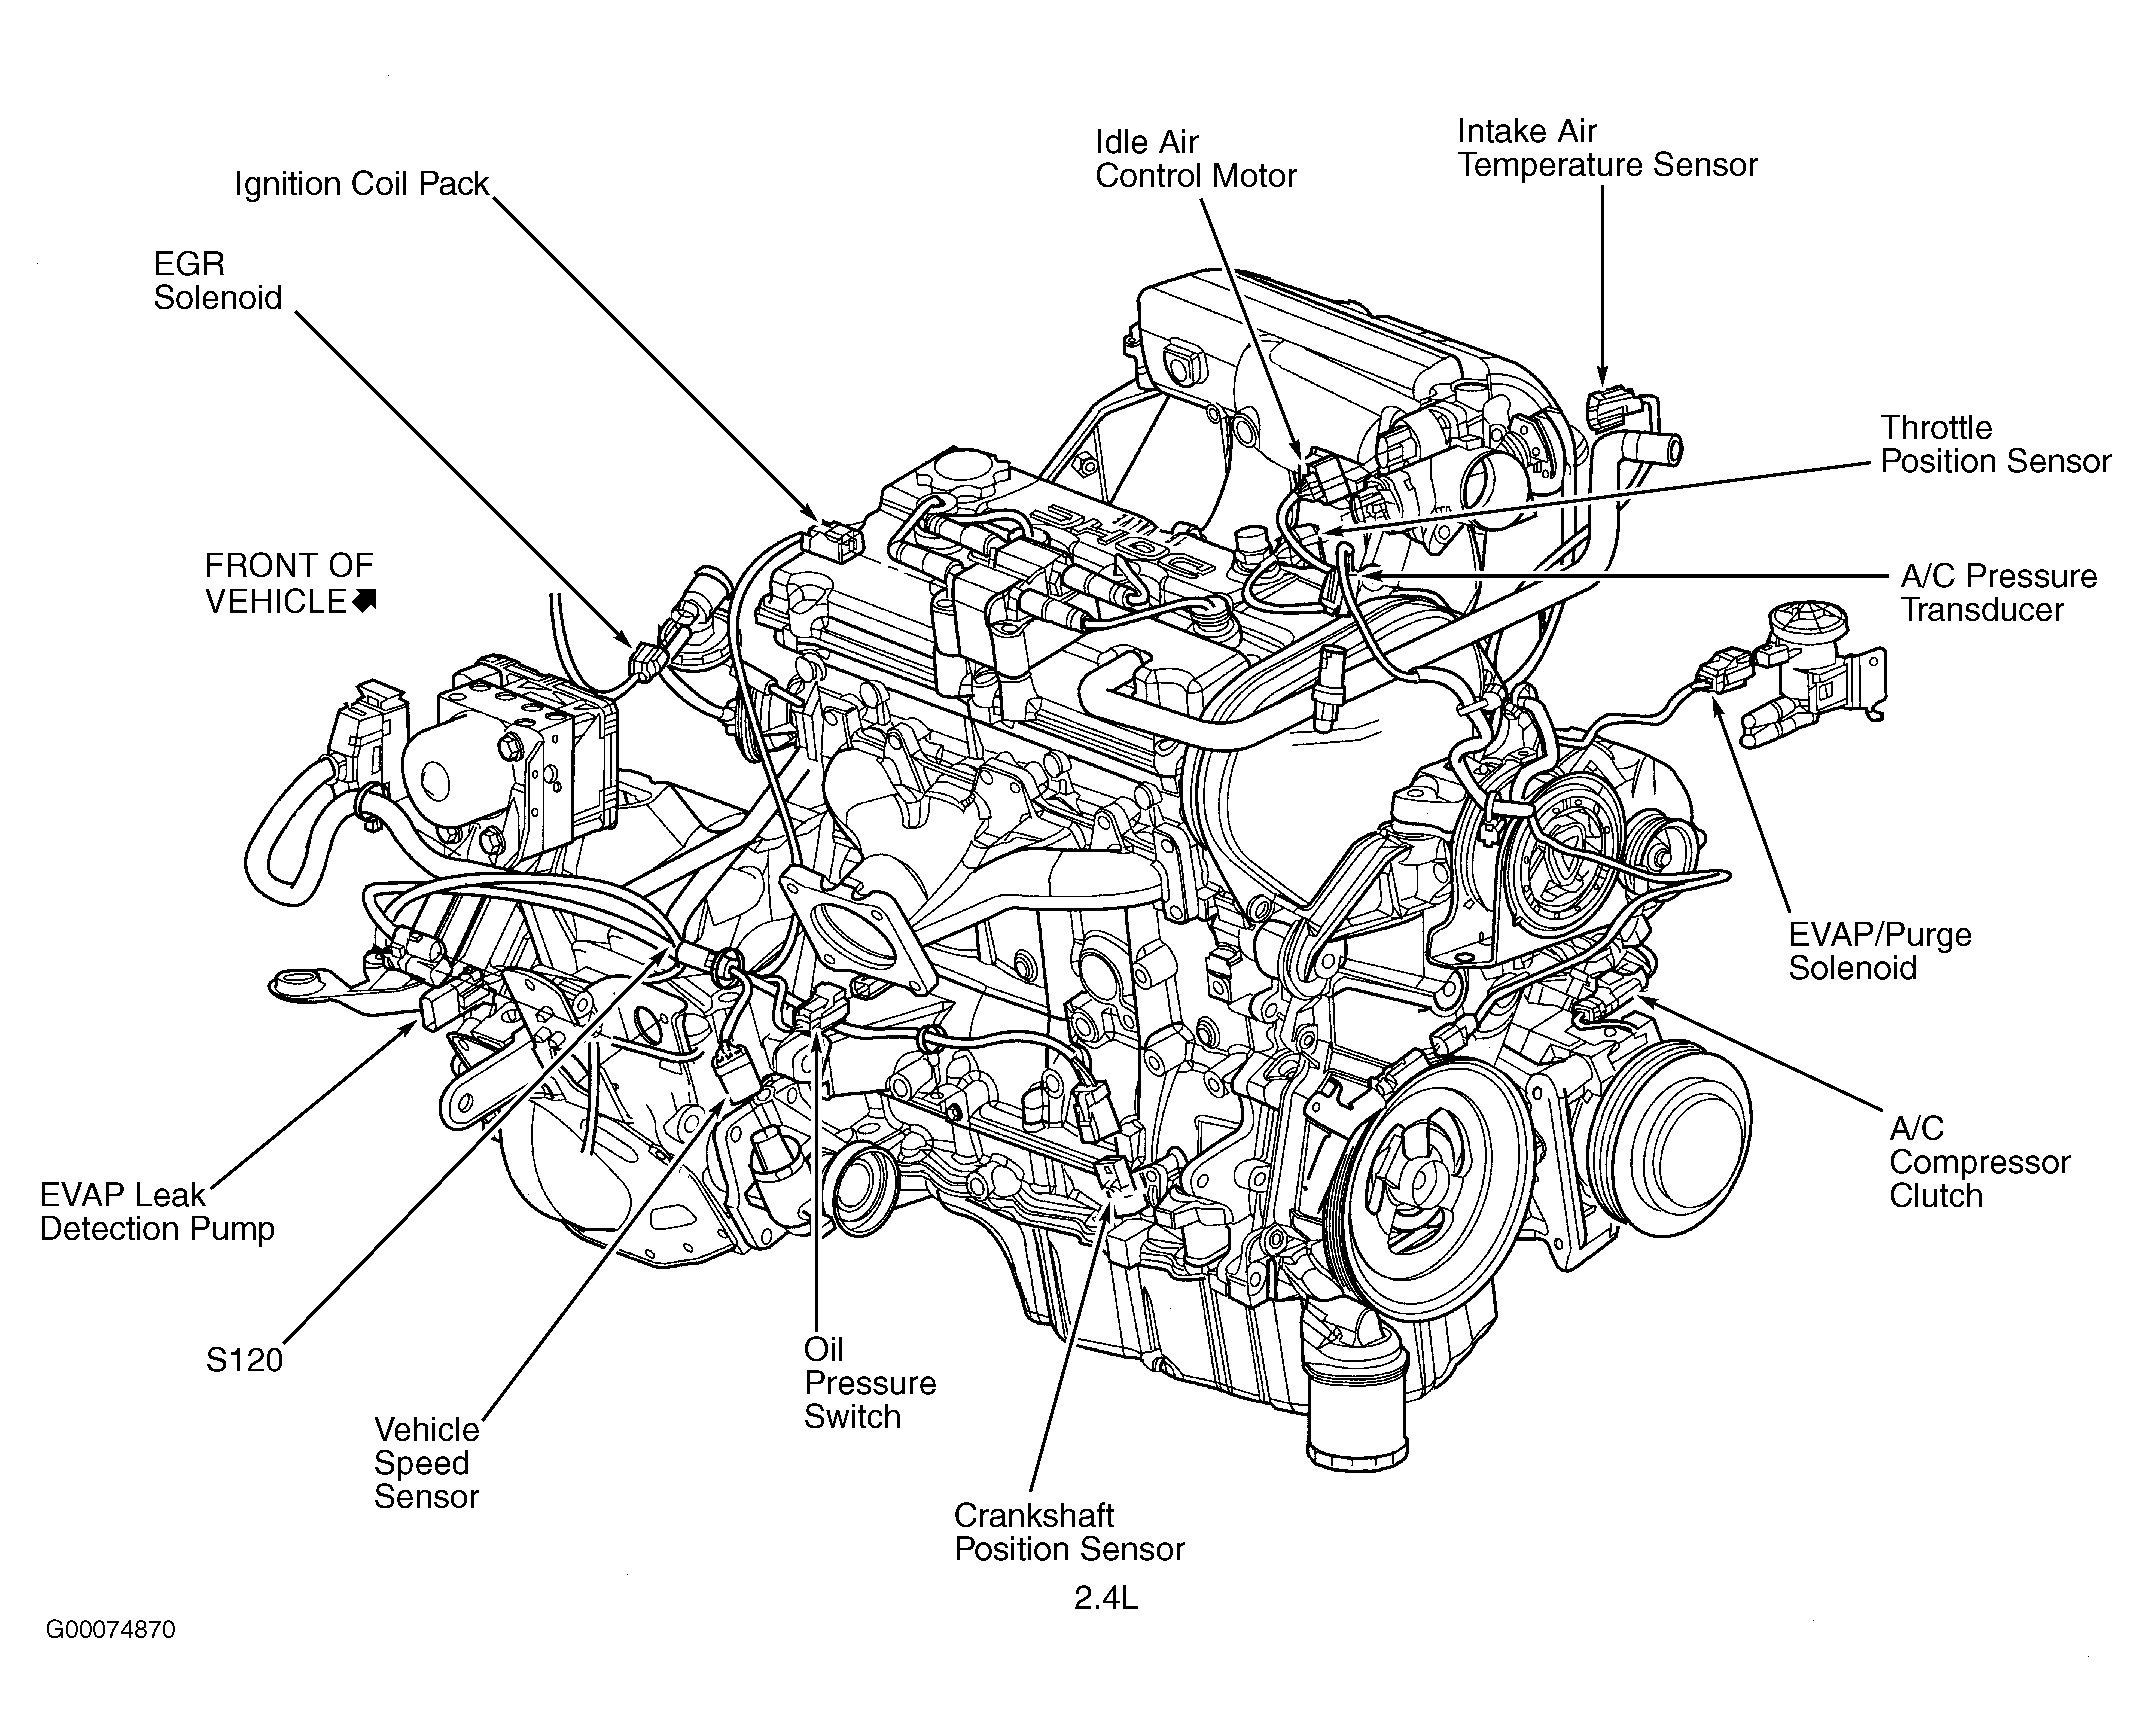 Chrysler Town & Country EL 2002 - Component Locations -  Engine (2.4L)